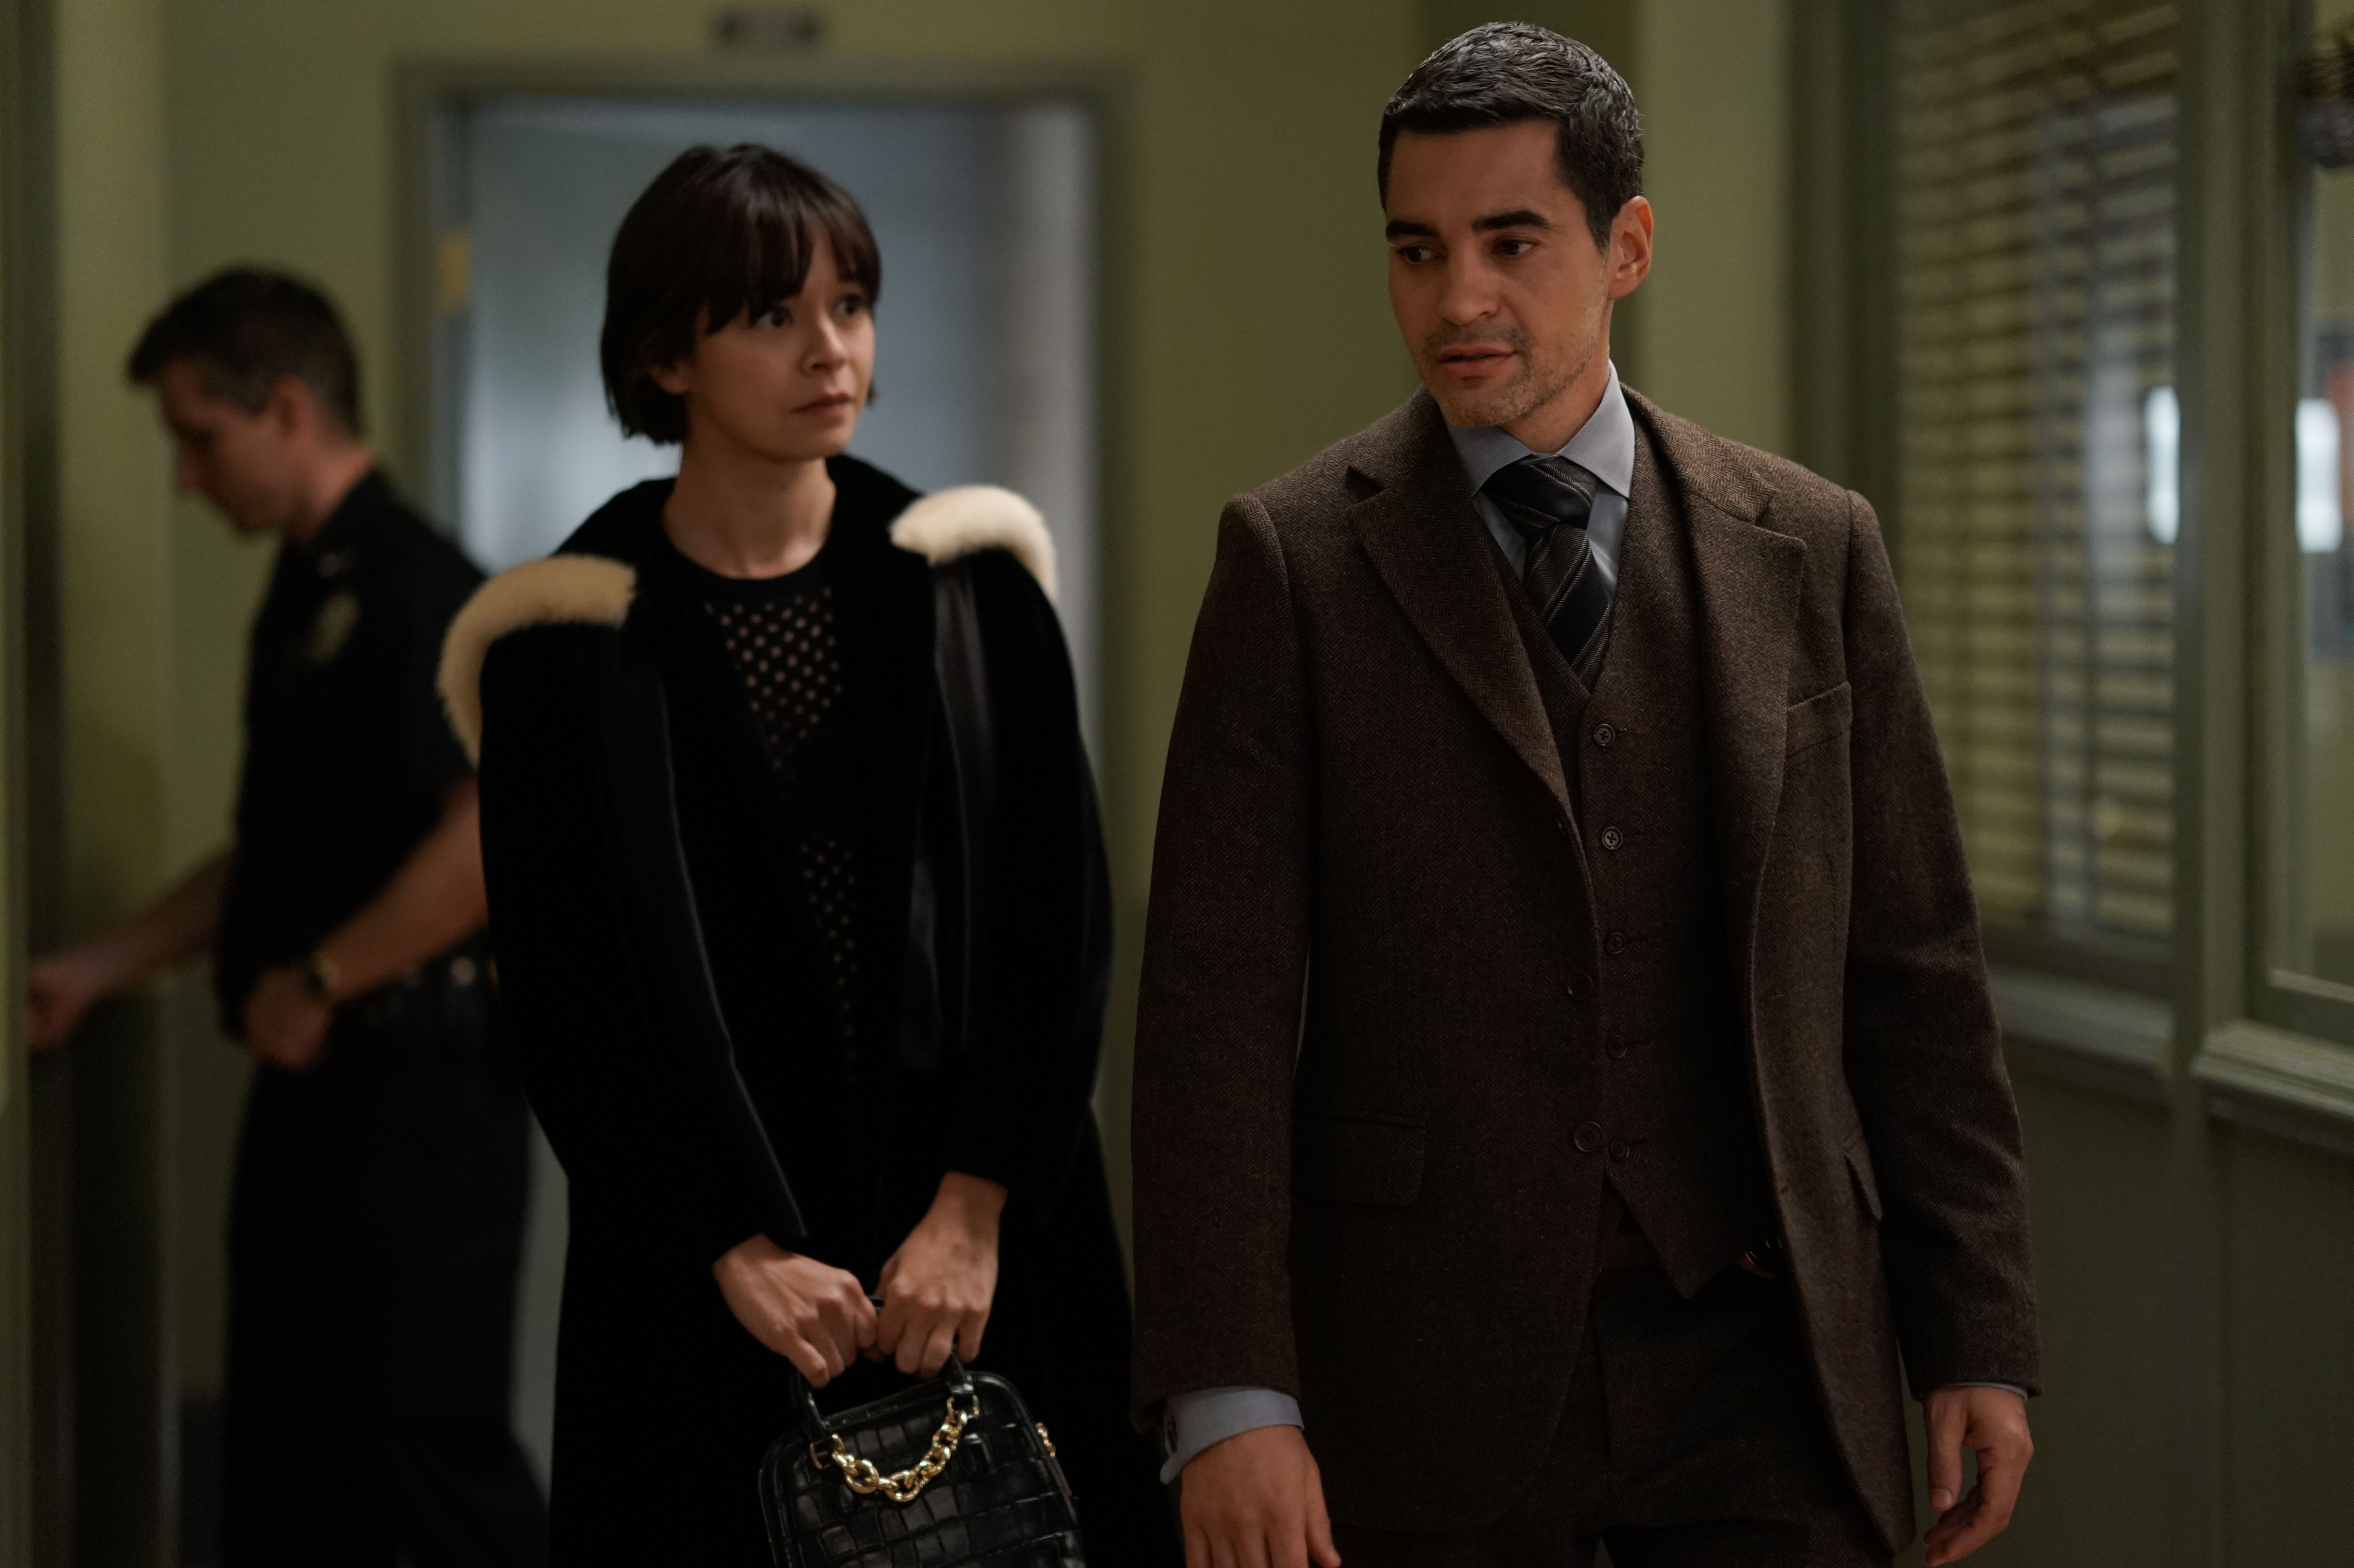 Julia Chan as Ava Green and Ramón Rodríguez as Will Trent in 'Will Trent' Season 1 Episode 5 on ABC. Ava wears a black coat. Will wears a brown three-piece suit.